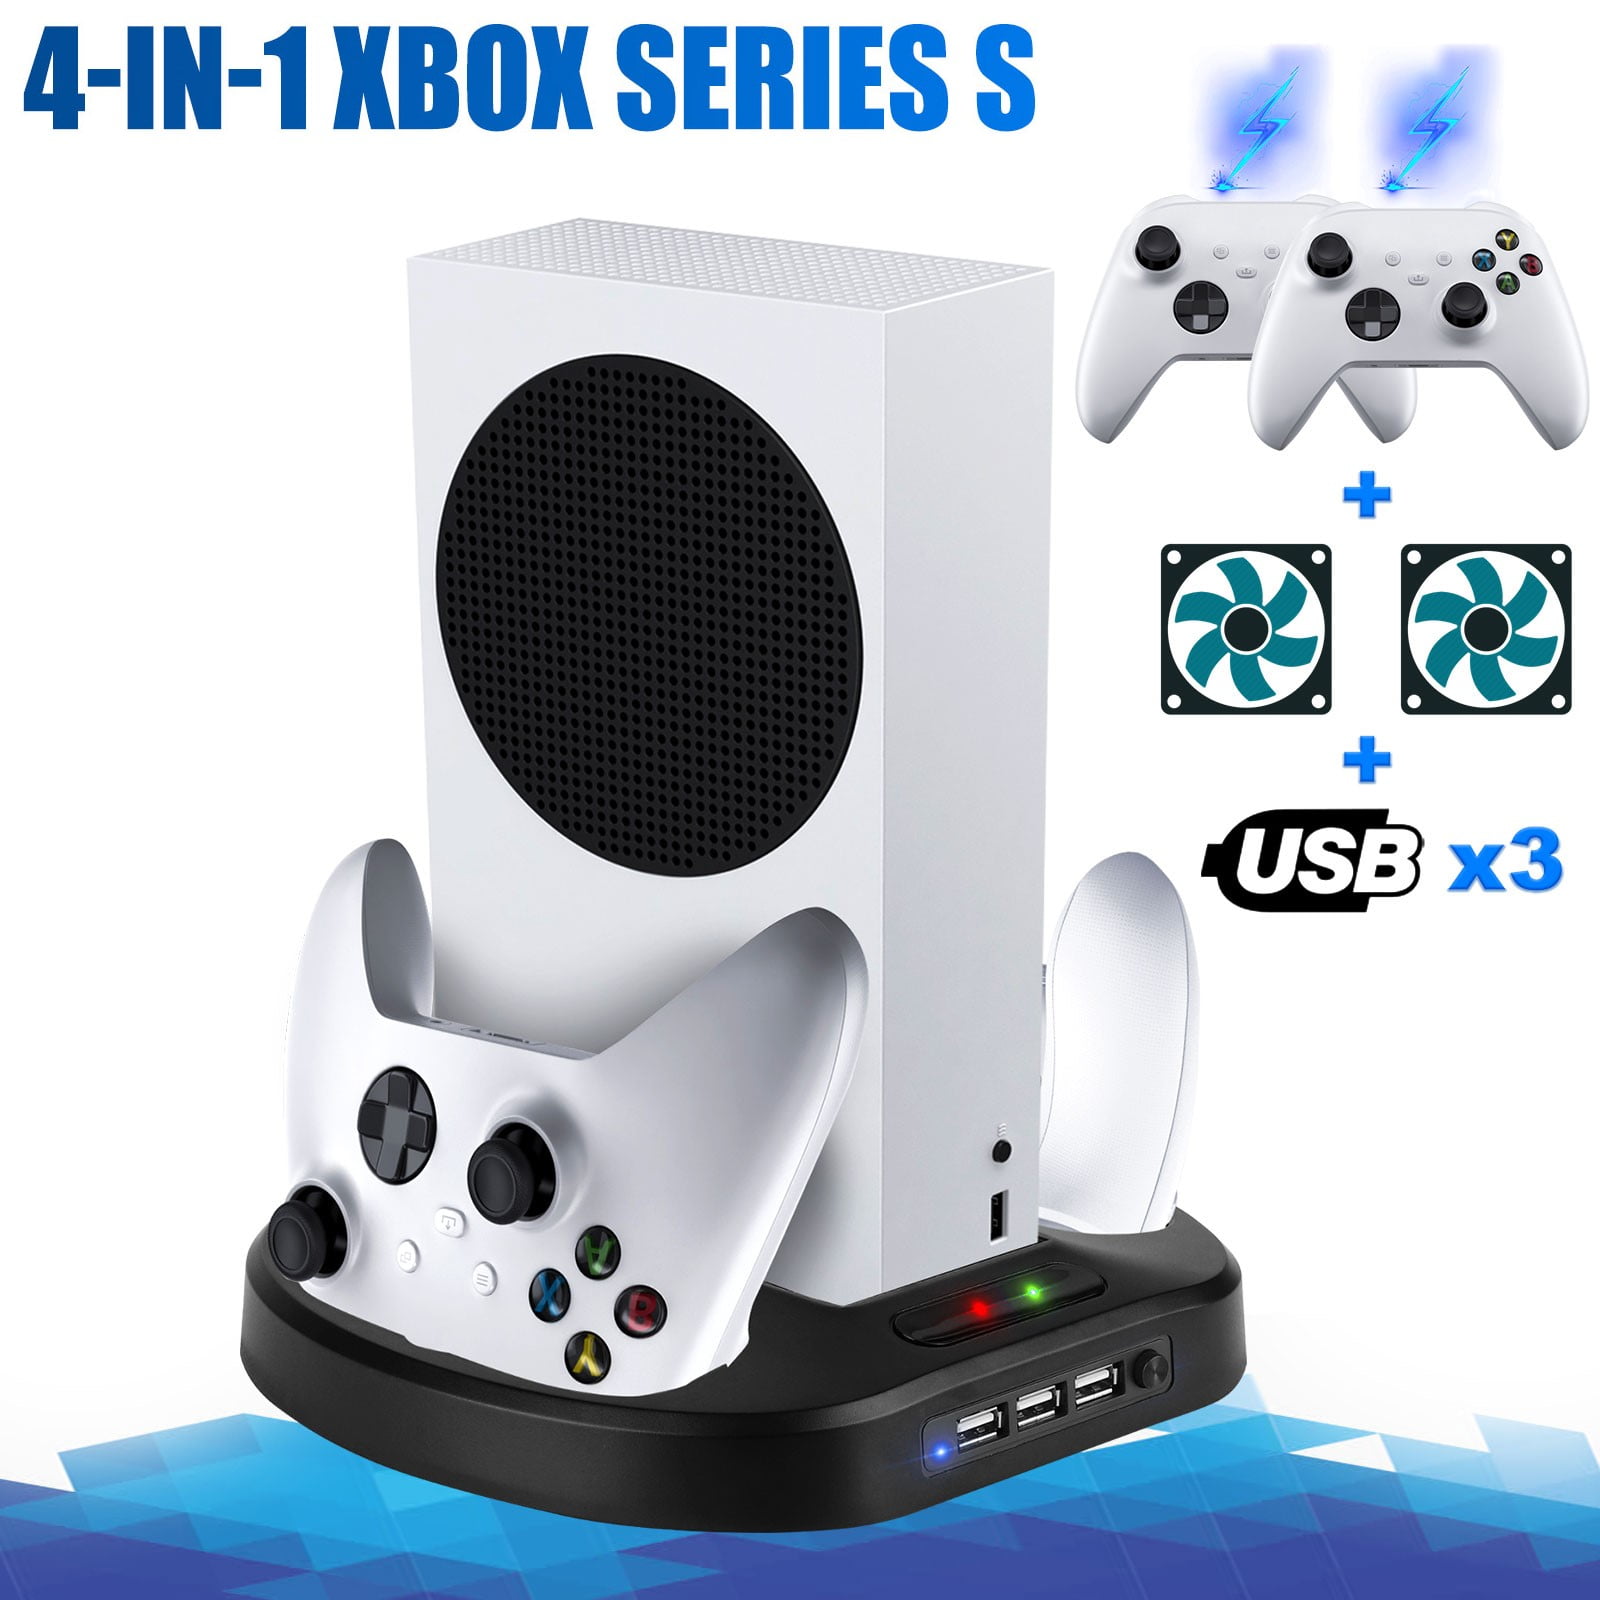 synoniemenlijst ga zo door leven Vertical Stand Fit for Xbox Series S with 2 Cooling Fans, EEEkit Dual  Controller Charging Station Fit for Microsoft Xbox Series S/X Controller W/  3 USB Ports, 2 Charger Ports, LED Indicator -